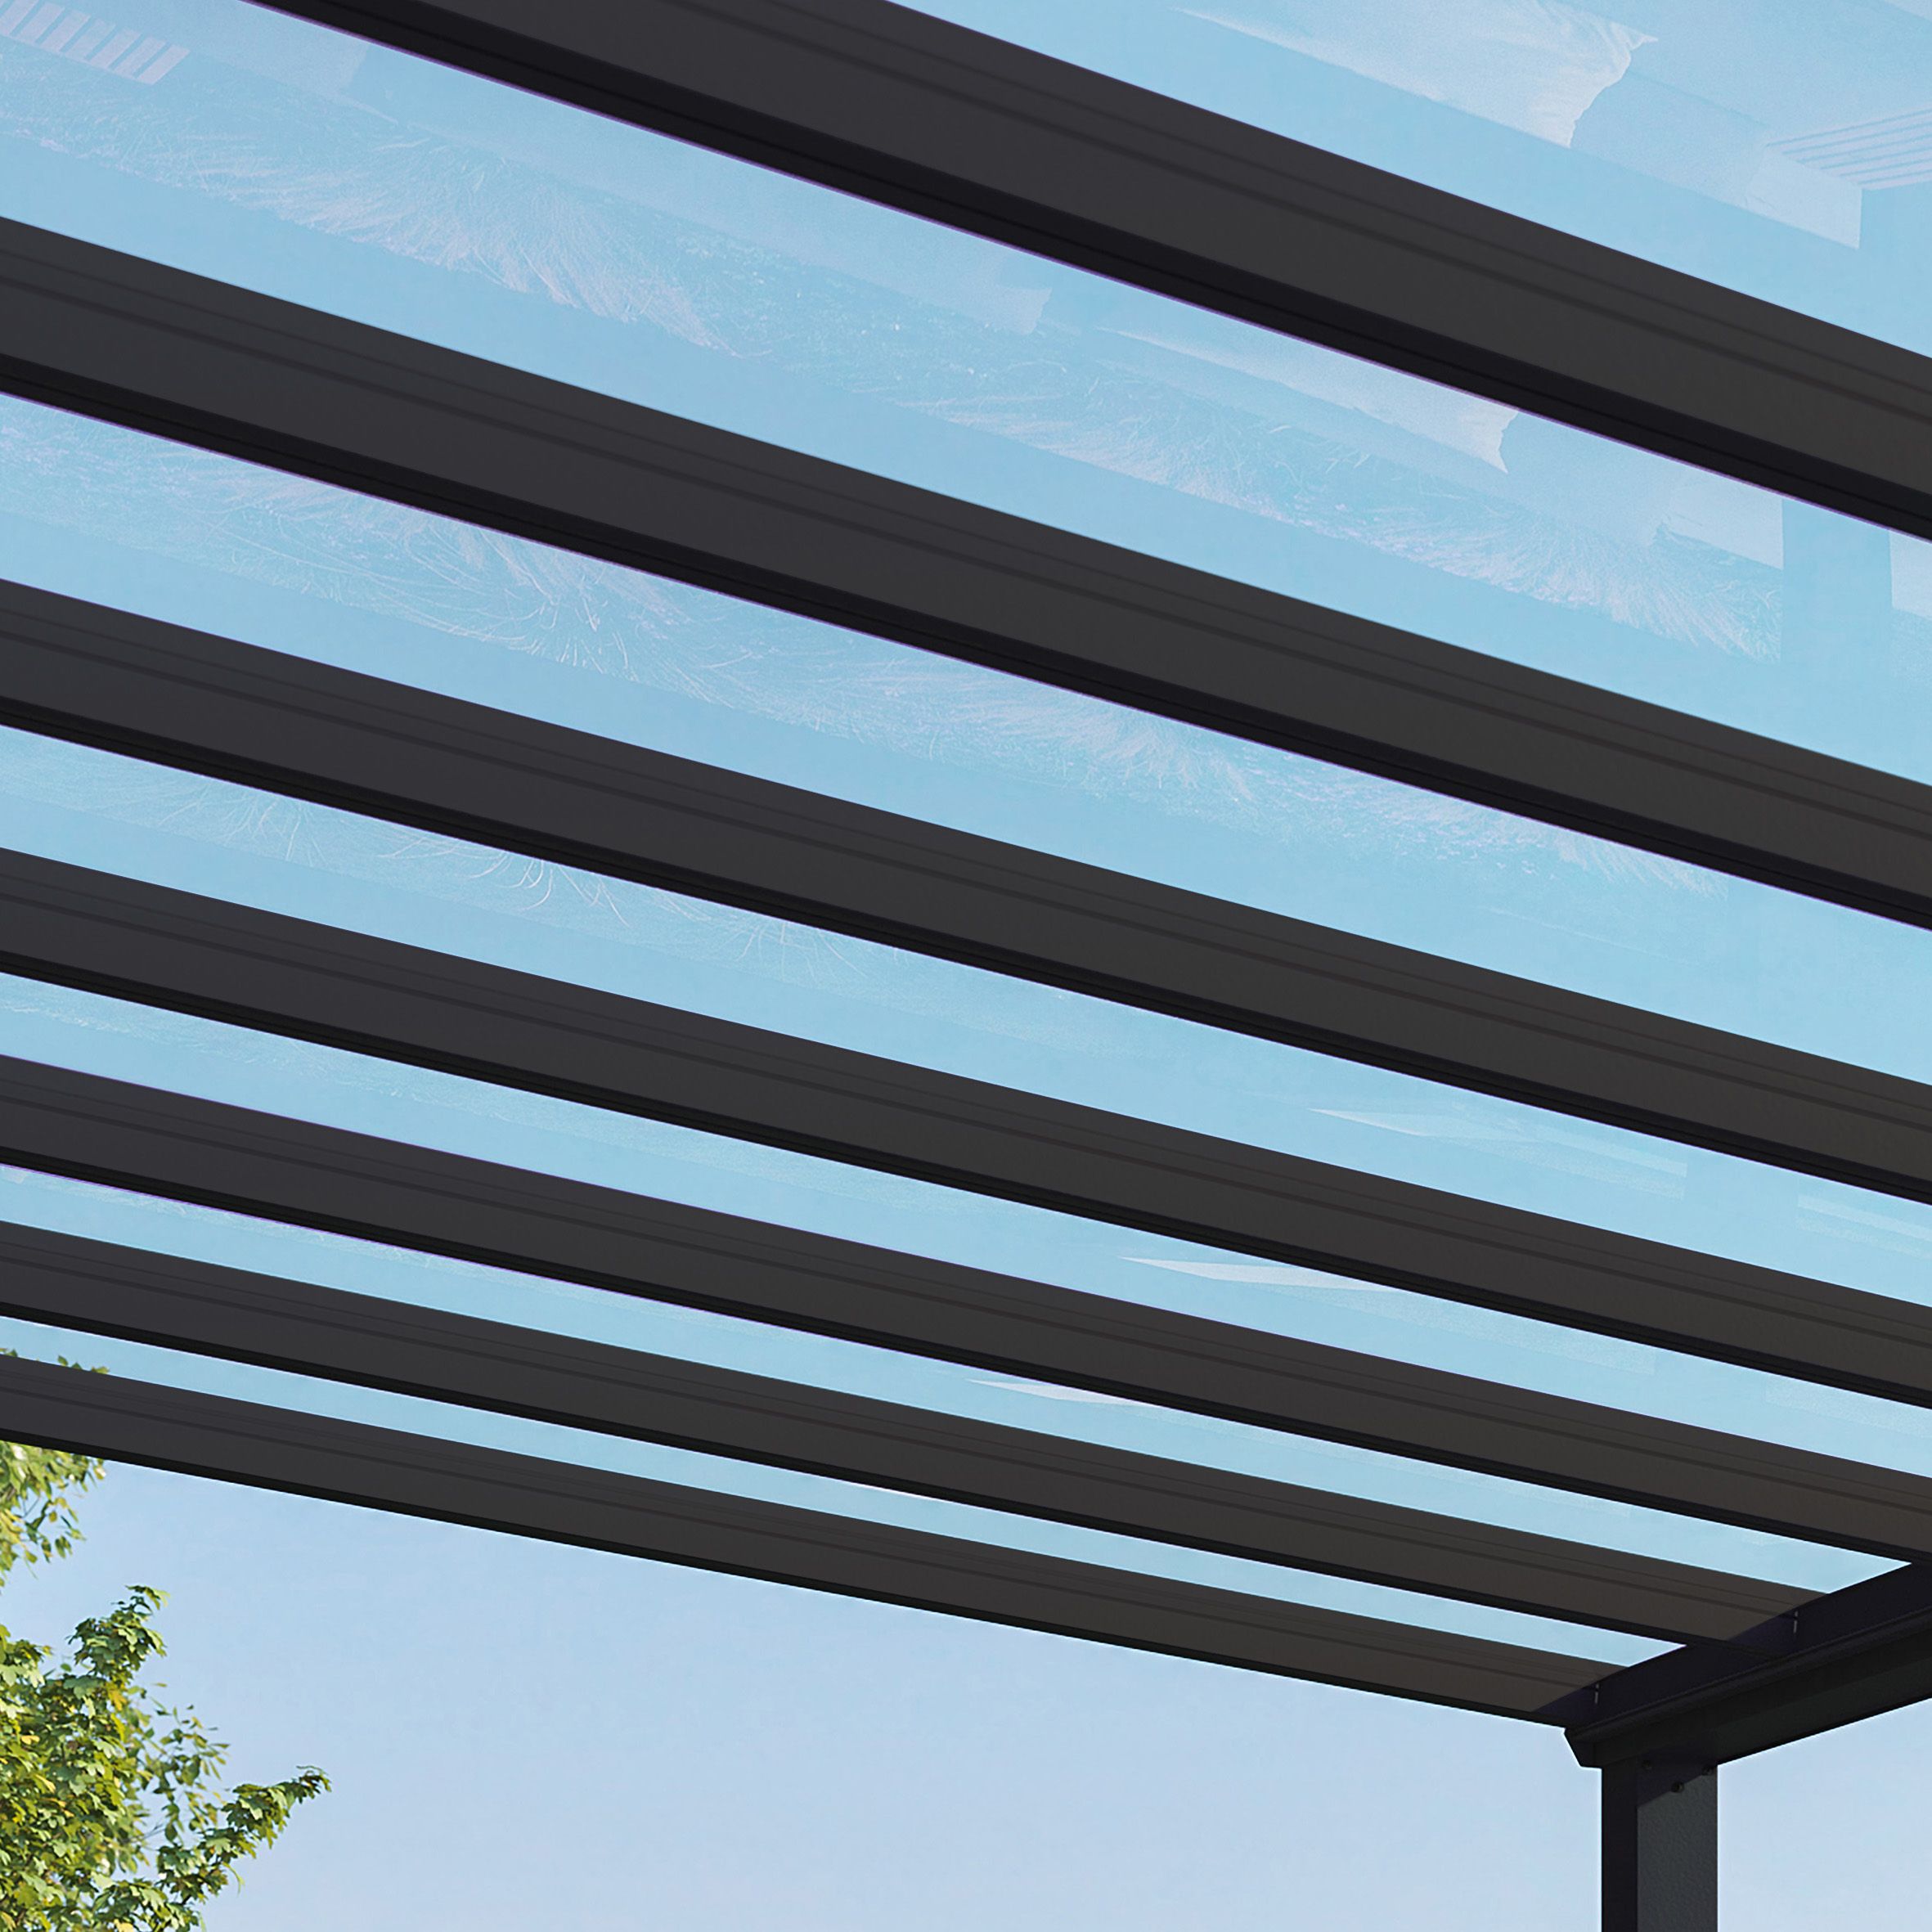 Palram - Canopia Stockholm Grey Patio cover (H)3400mm (W)7400mm